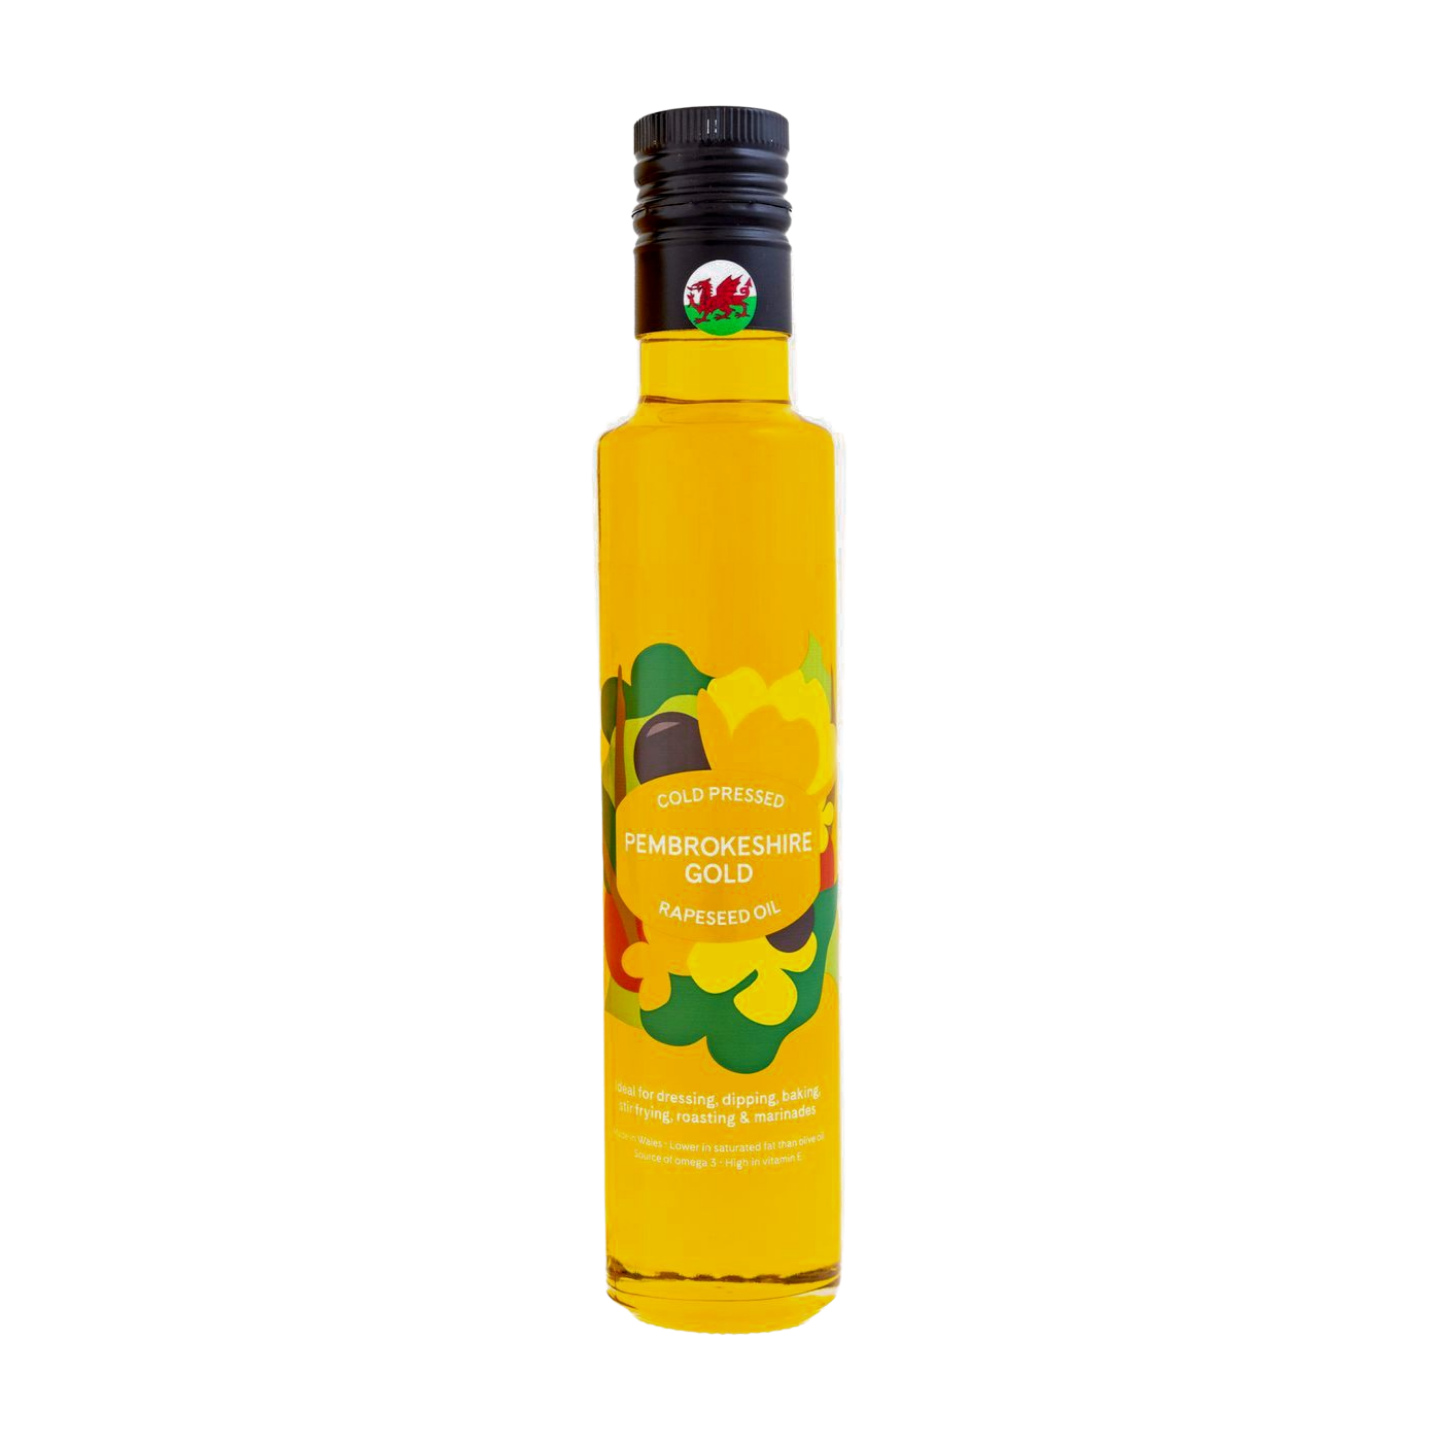 Pembrokeshire Gold Original Welsh Cold Pressed Rapeseed Oil (250ml)